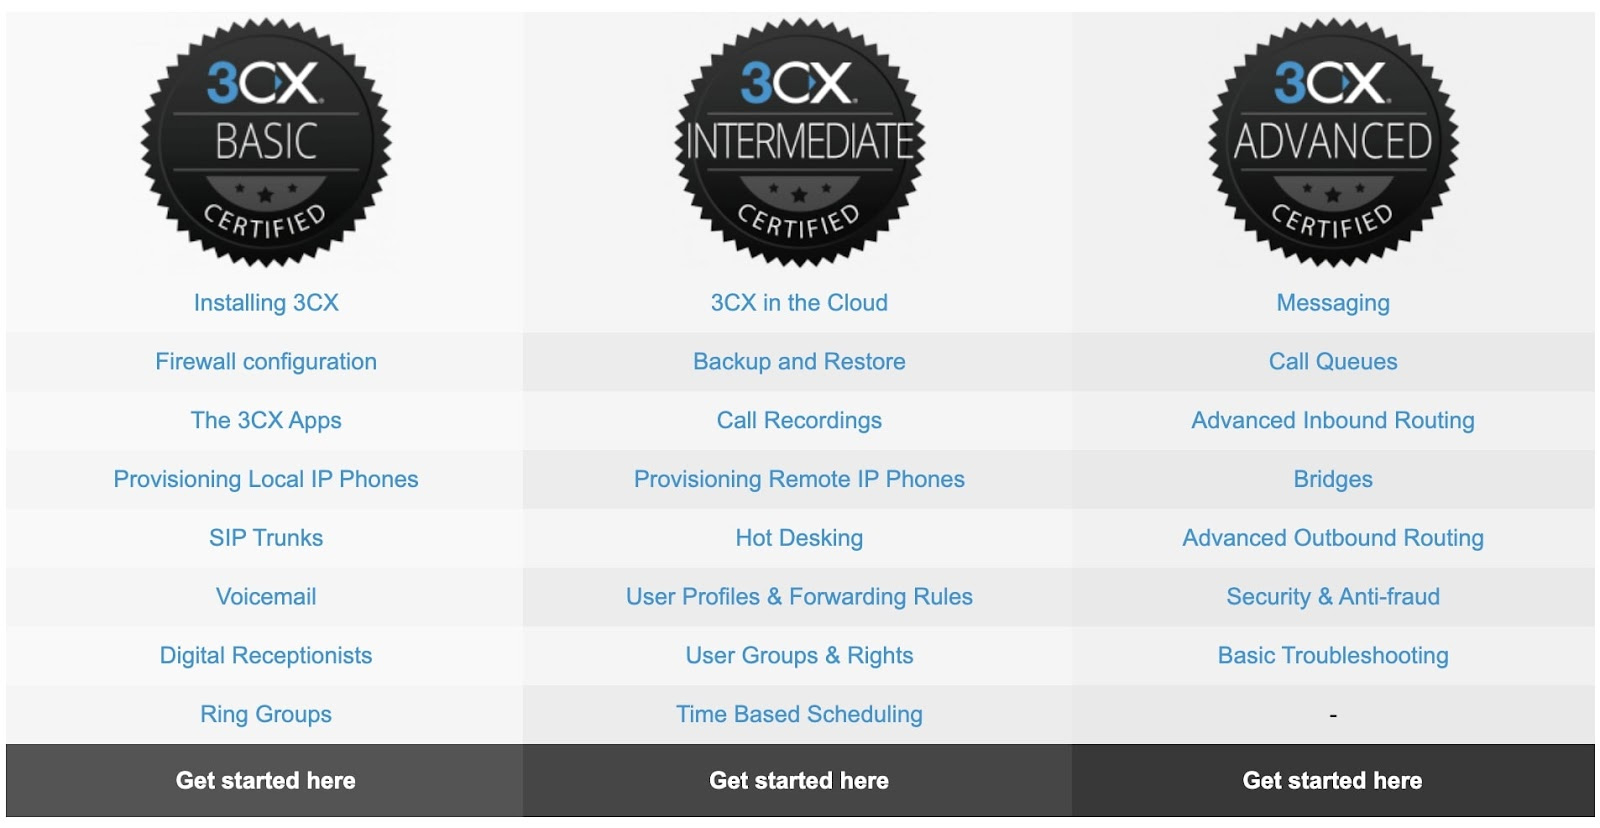 Graphics of the different 3CX certifications.